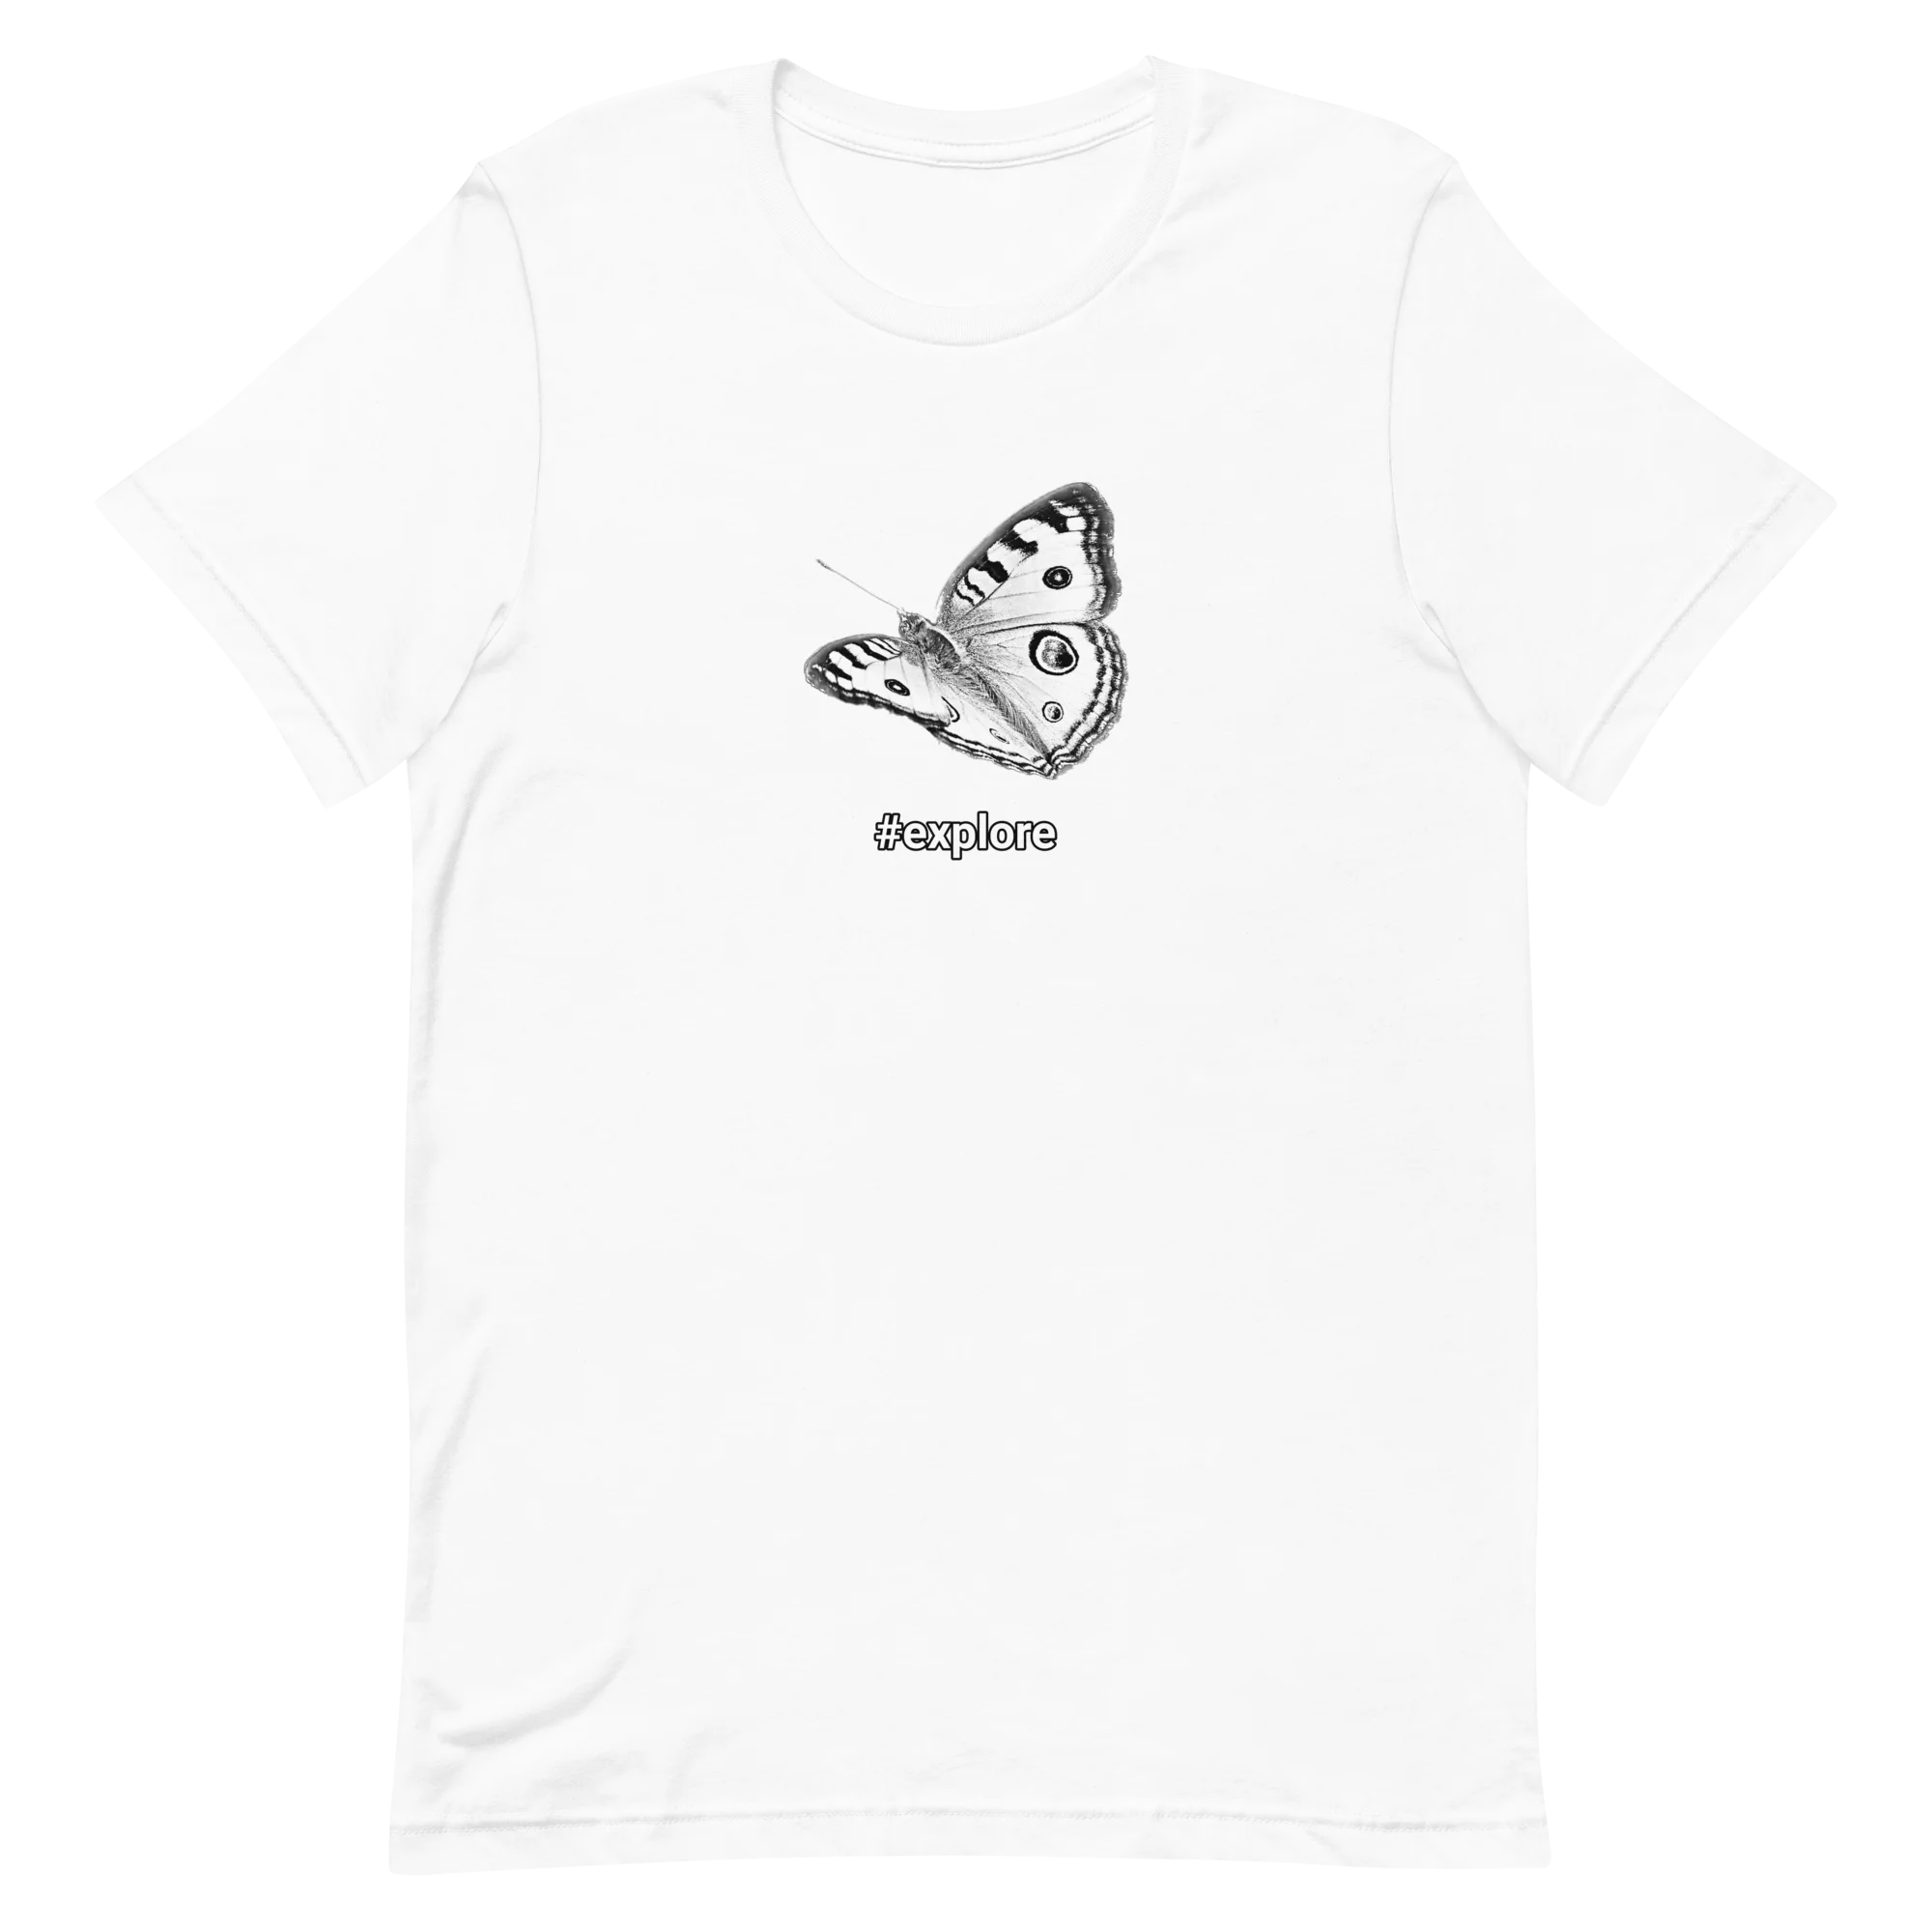 T-Shirt featuring an image of a butterfly